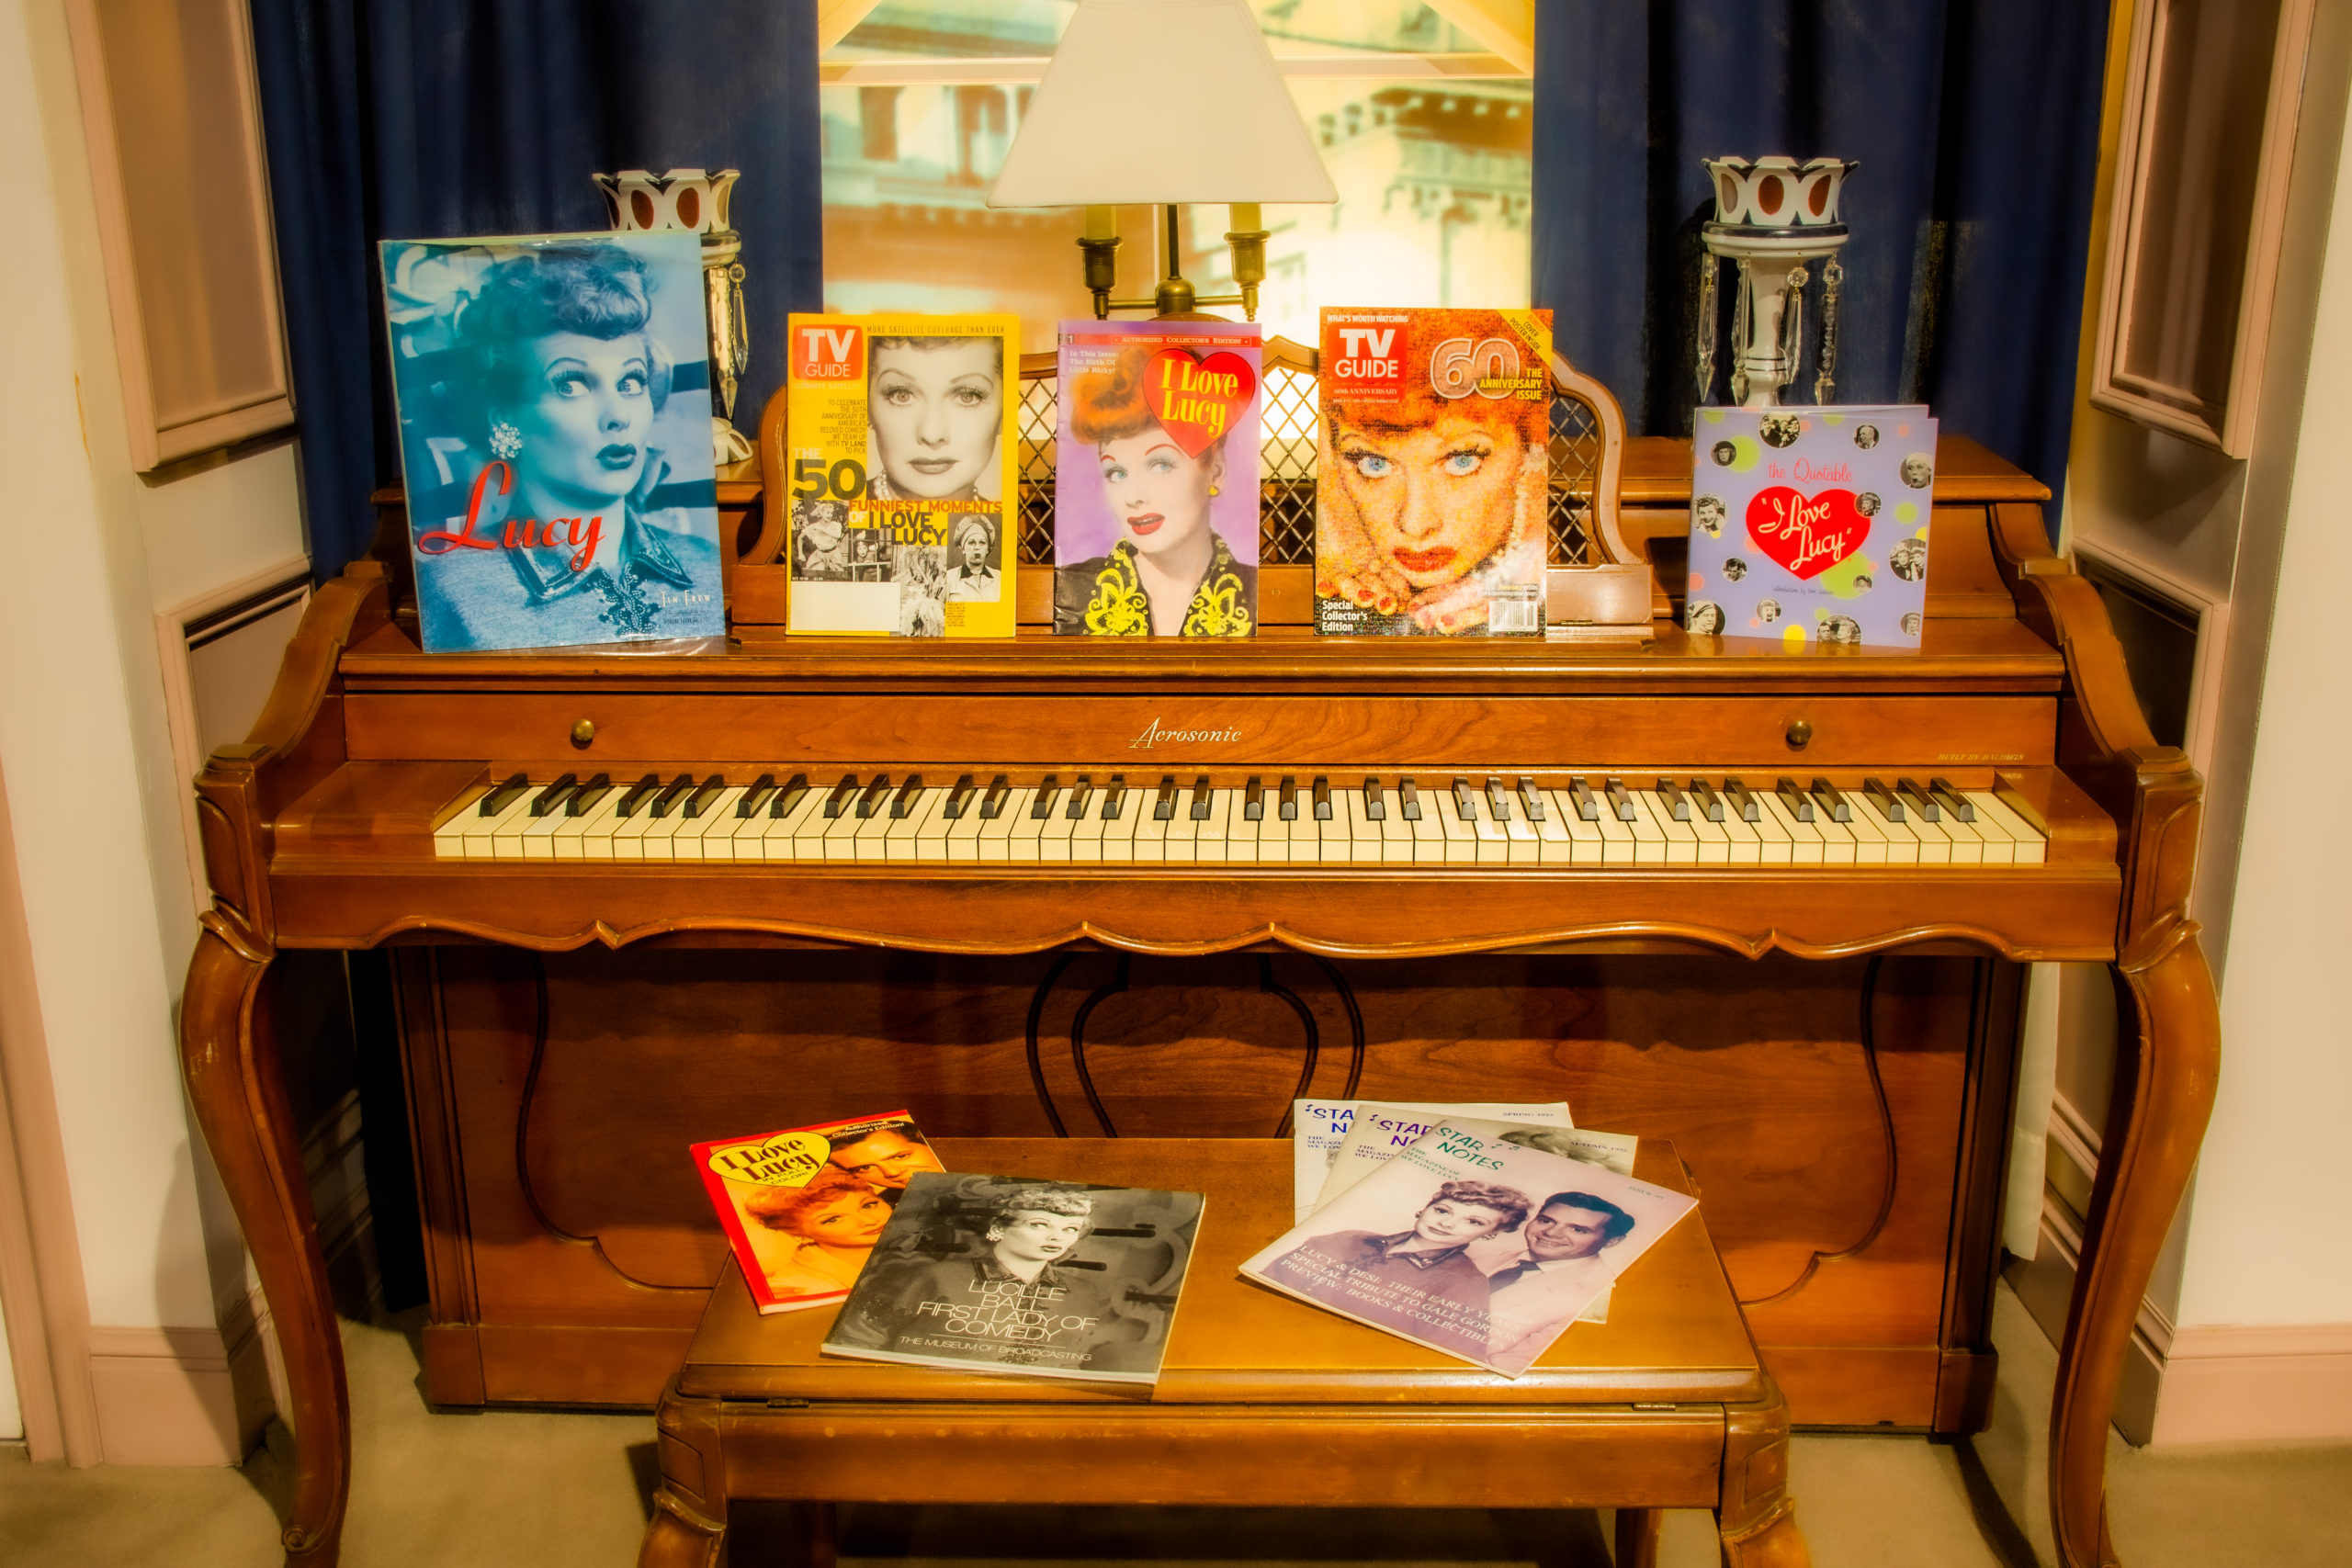 Vintage I Love Lucy magazines displayed on piano